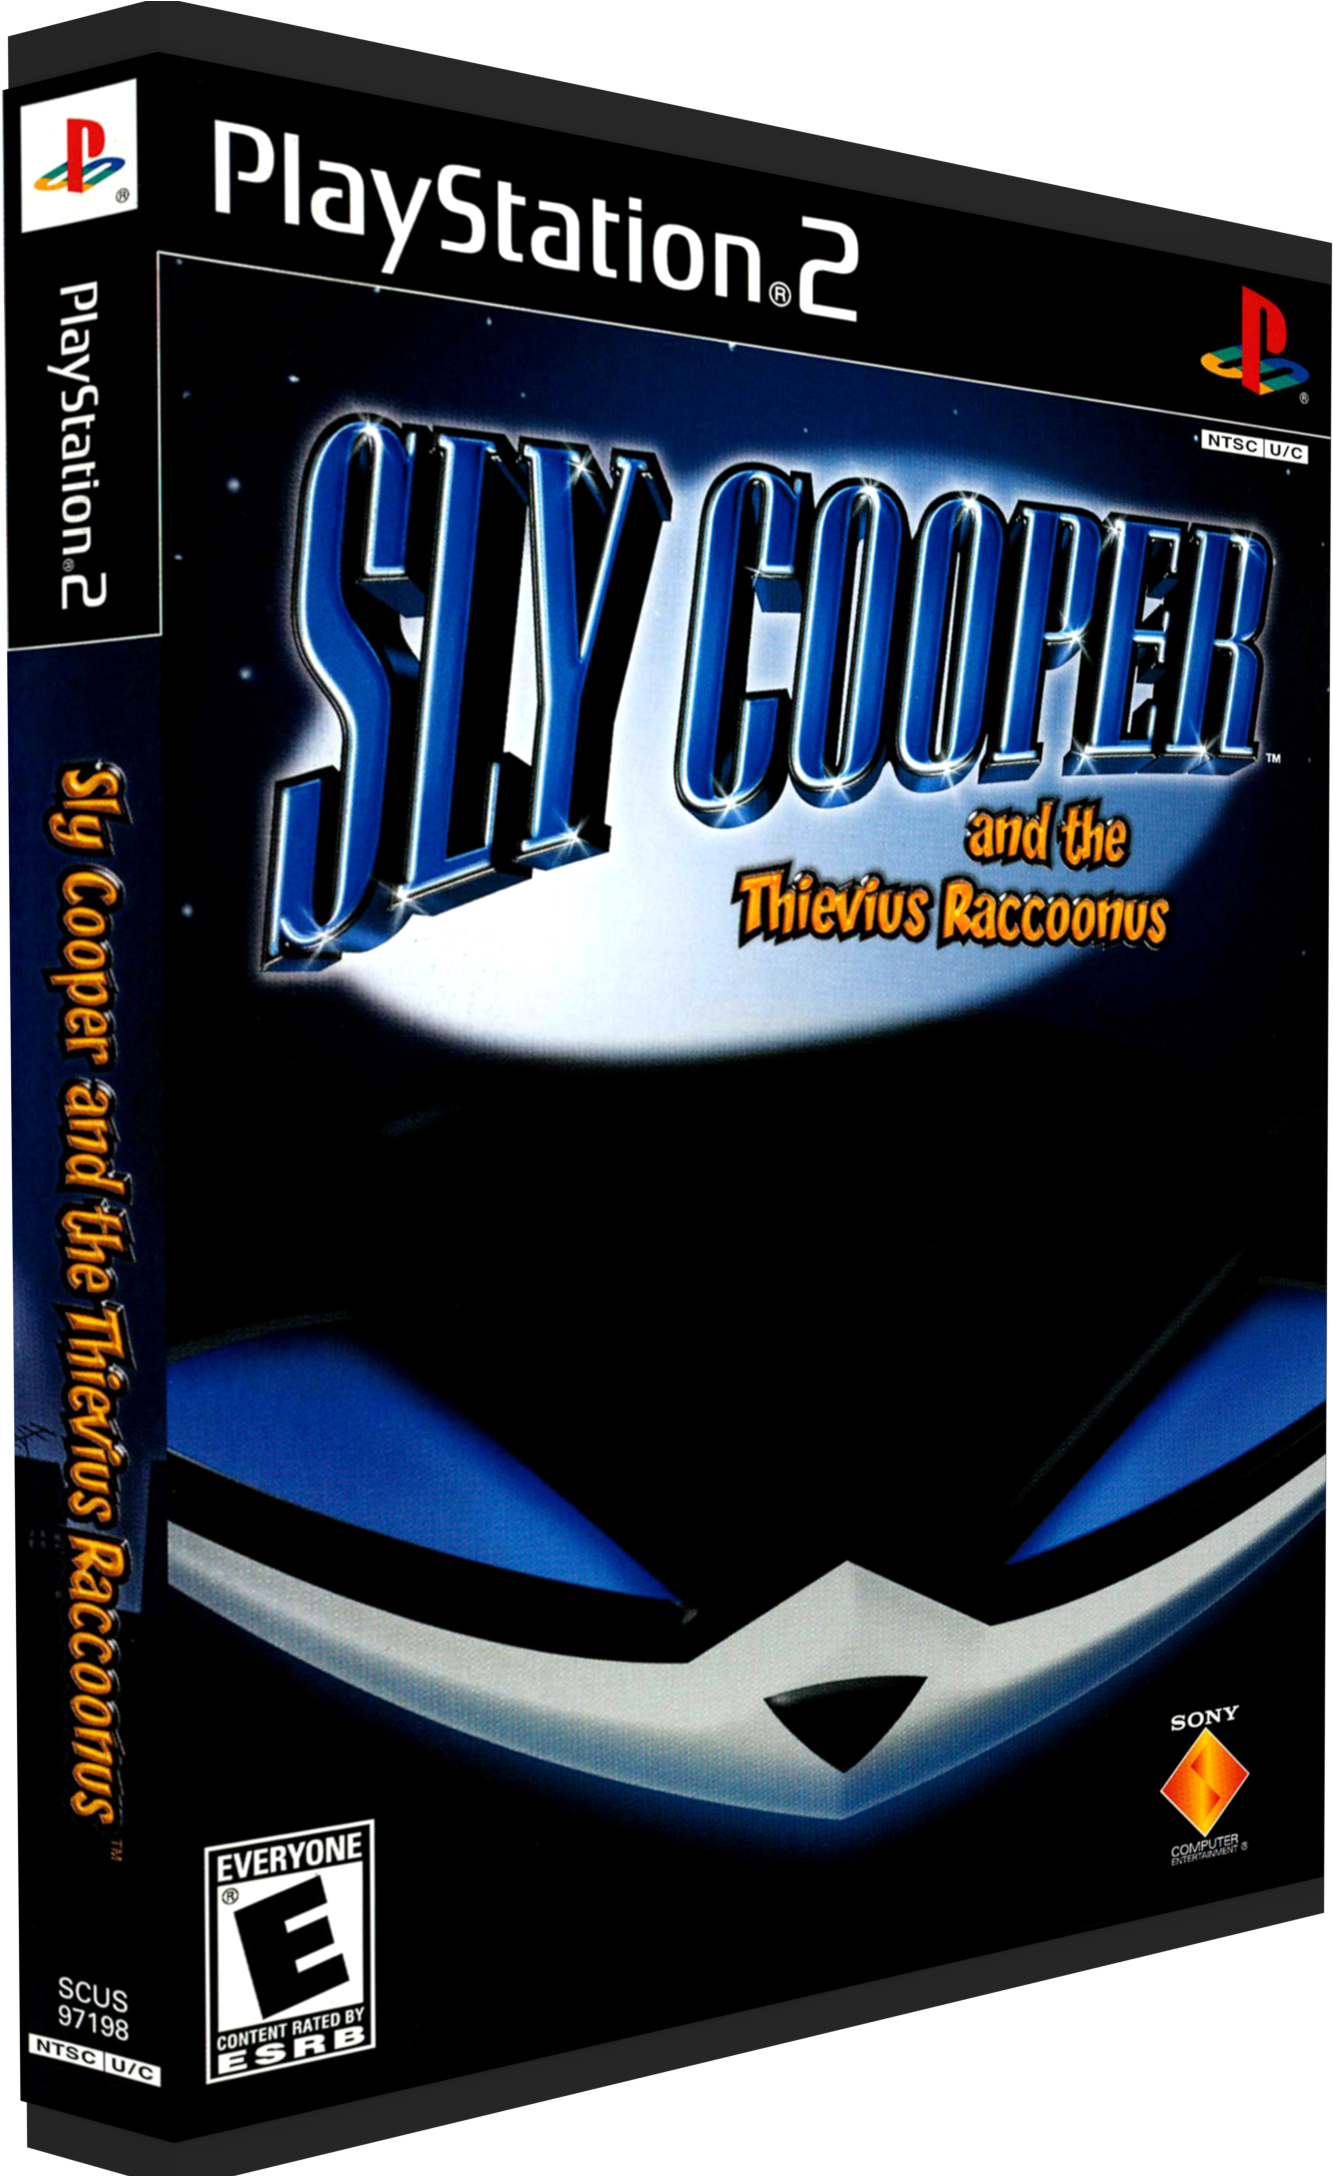 sly cooper 1 ps2